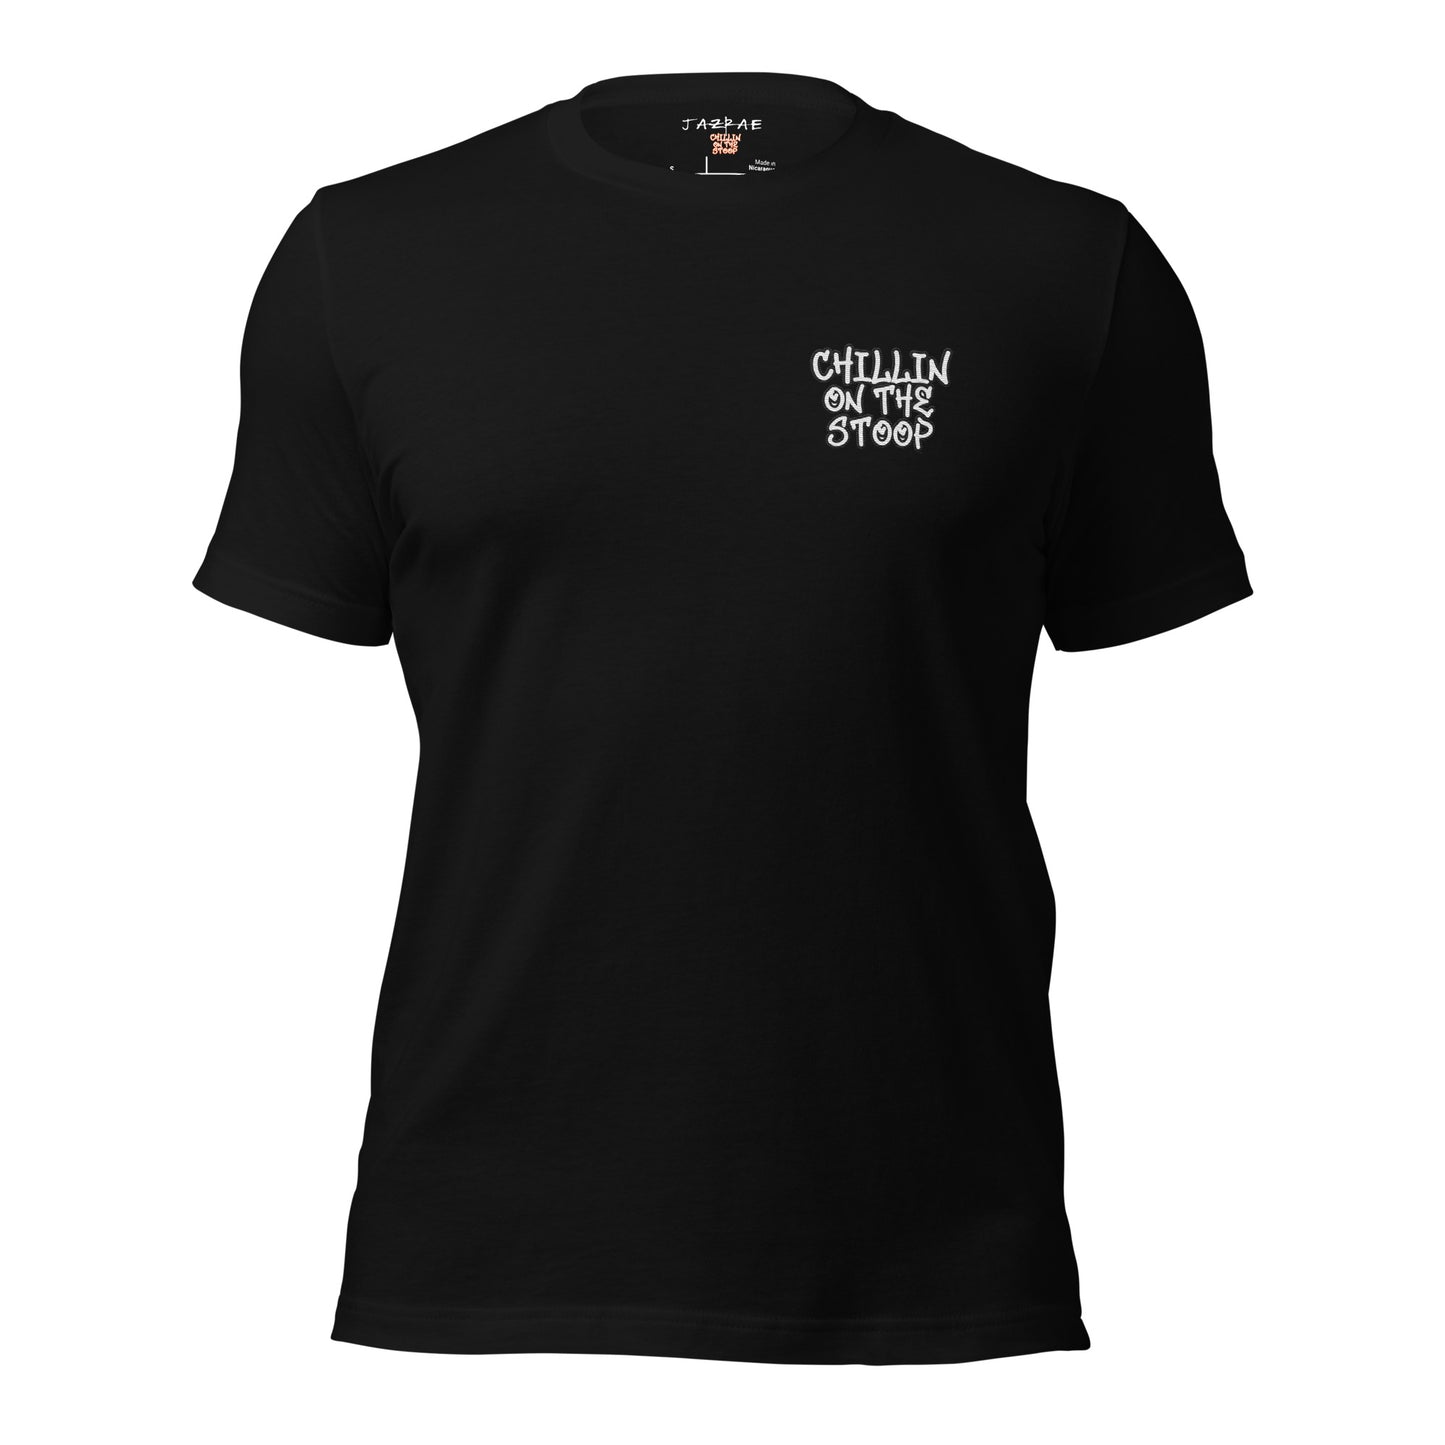 CHILLIN ON THE STOOP Stitched small left side Unisex t-shirt